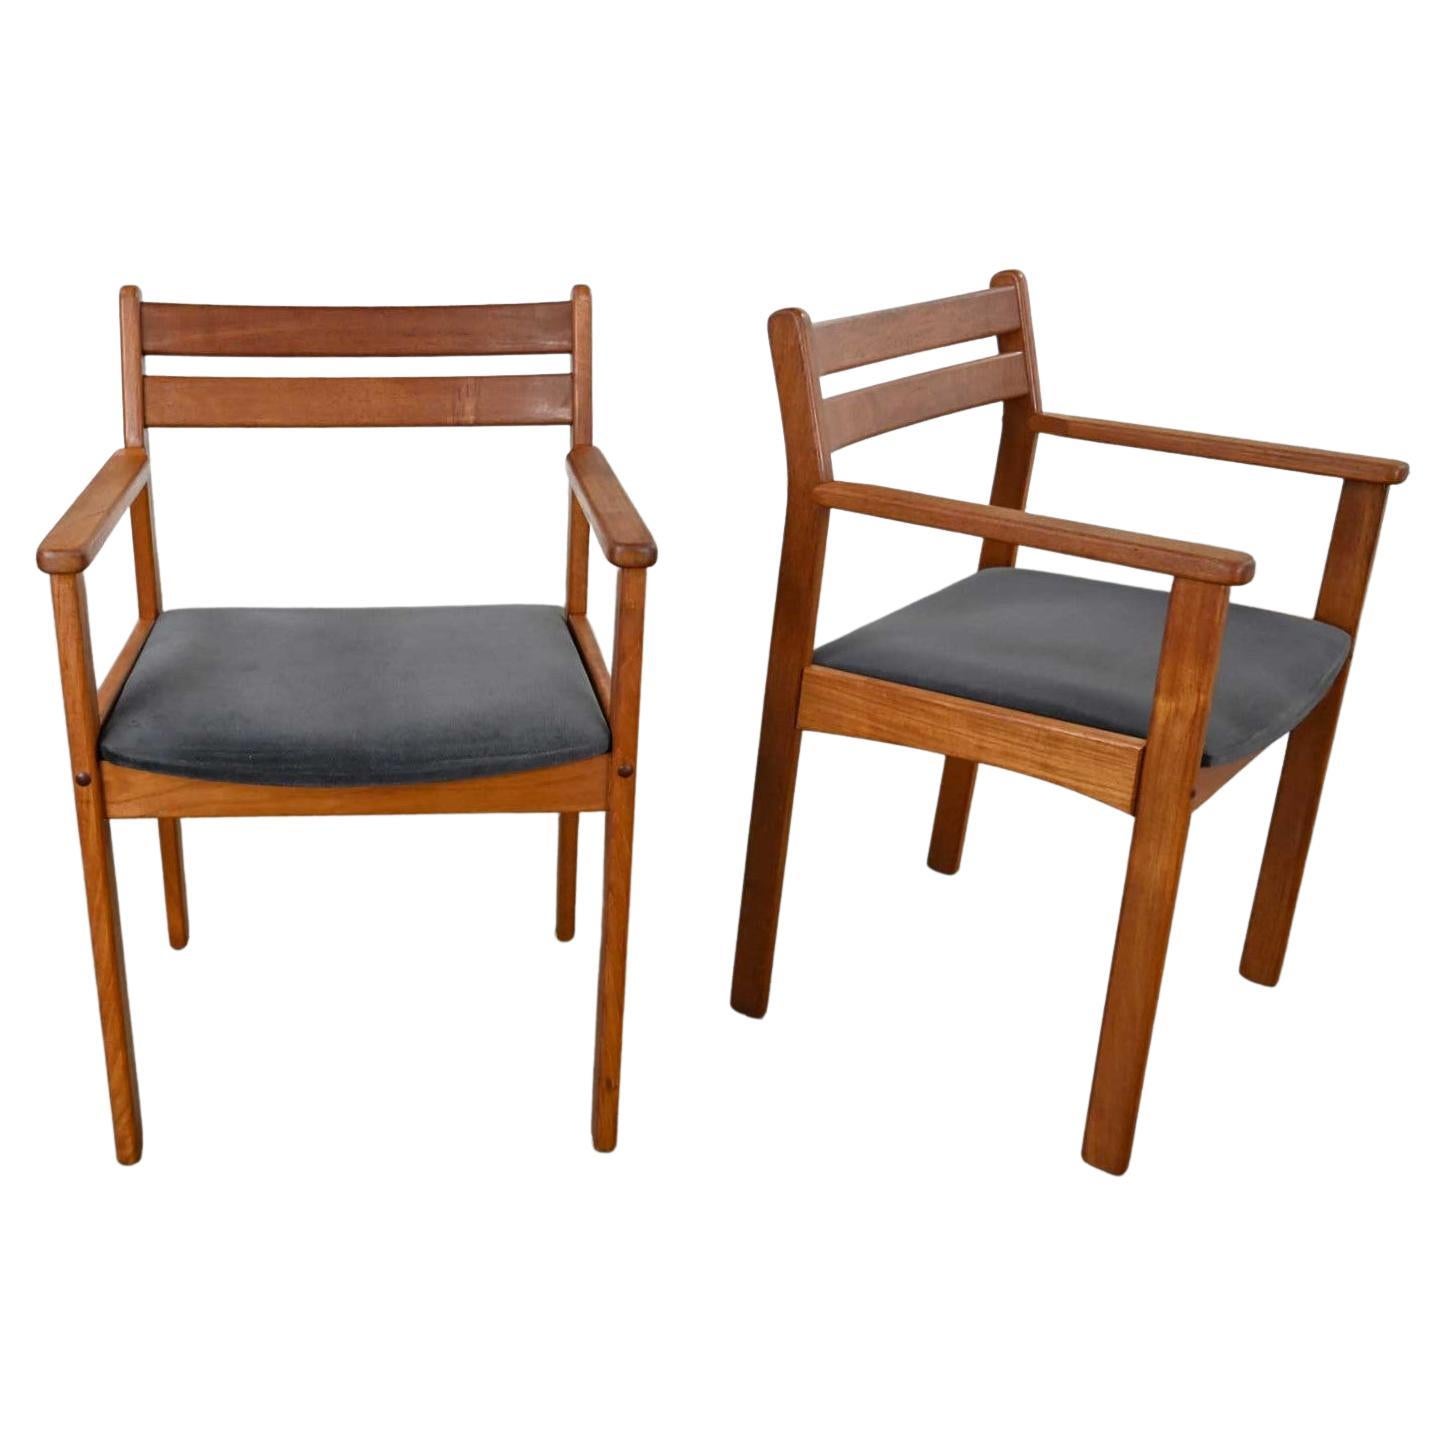 Scandinavian Modern Teak Pair of Armchairs with Brushed Charcoal Fabric Seats